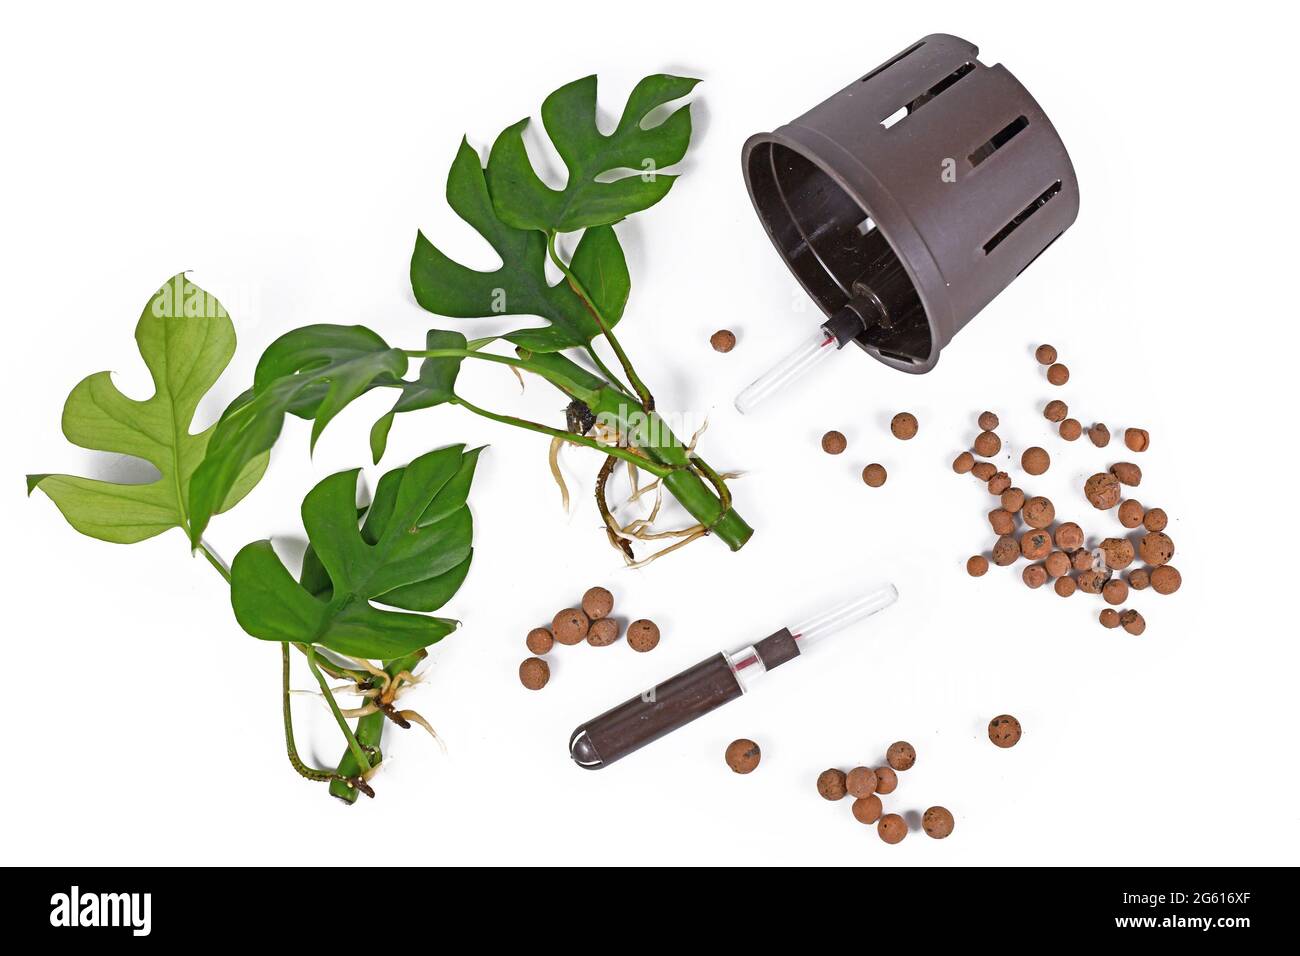 Tools for keeping houseplants in passive hydroponics system without soil with water level indicators, expanded clay leca ball pellets, rooted plant cu Stock Photo